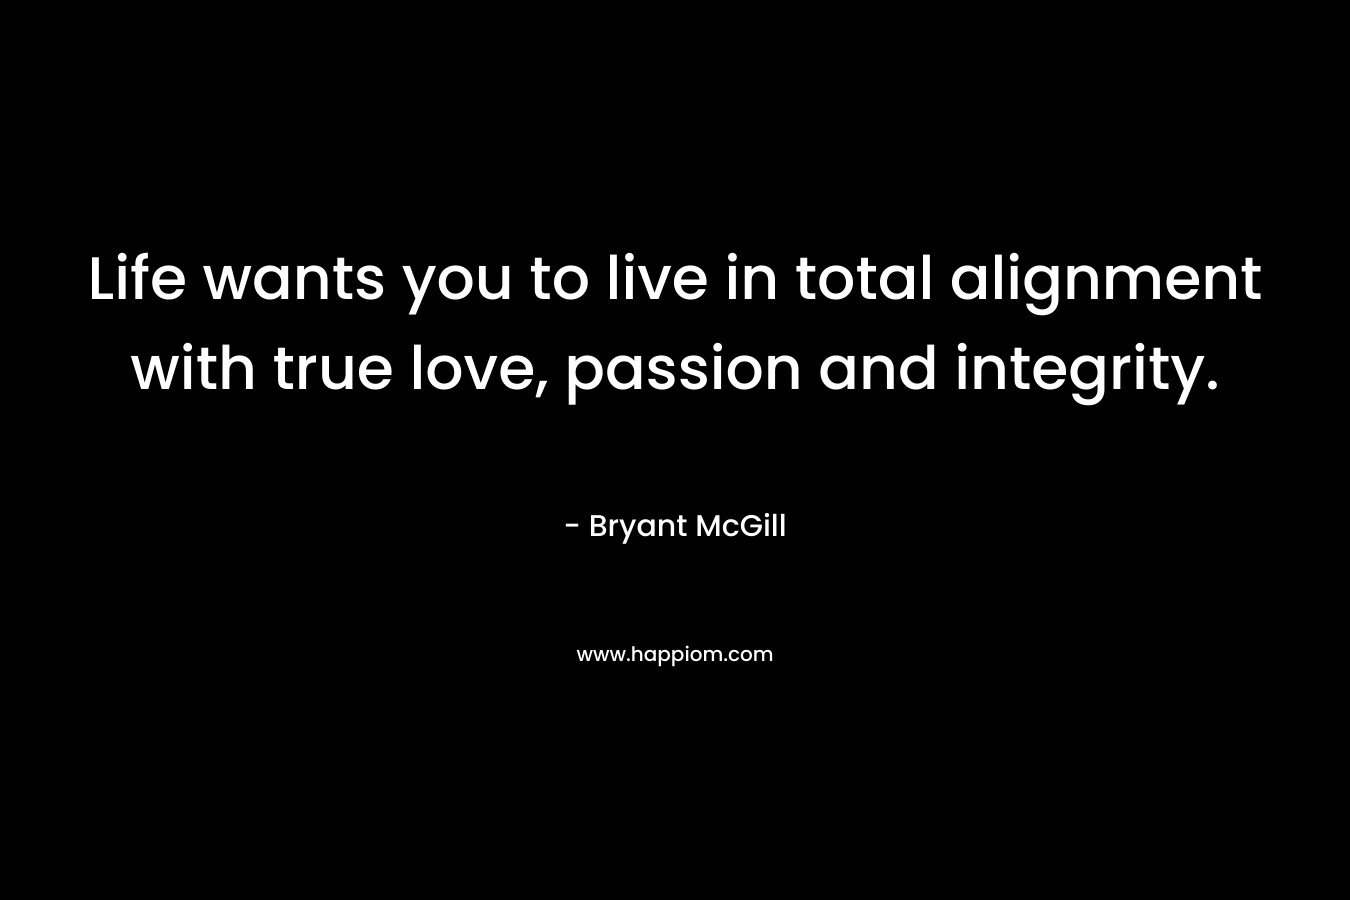 Life wants you to live in total alignment with true love, passion and integrity.